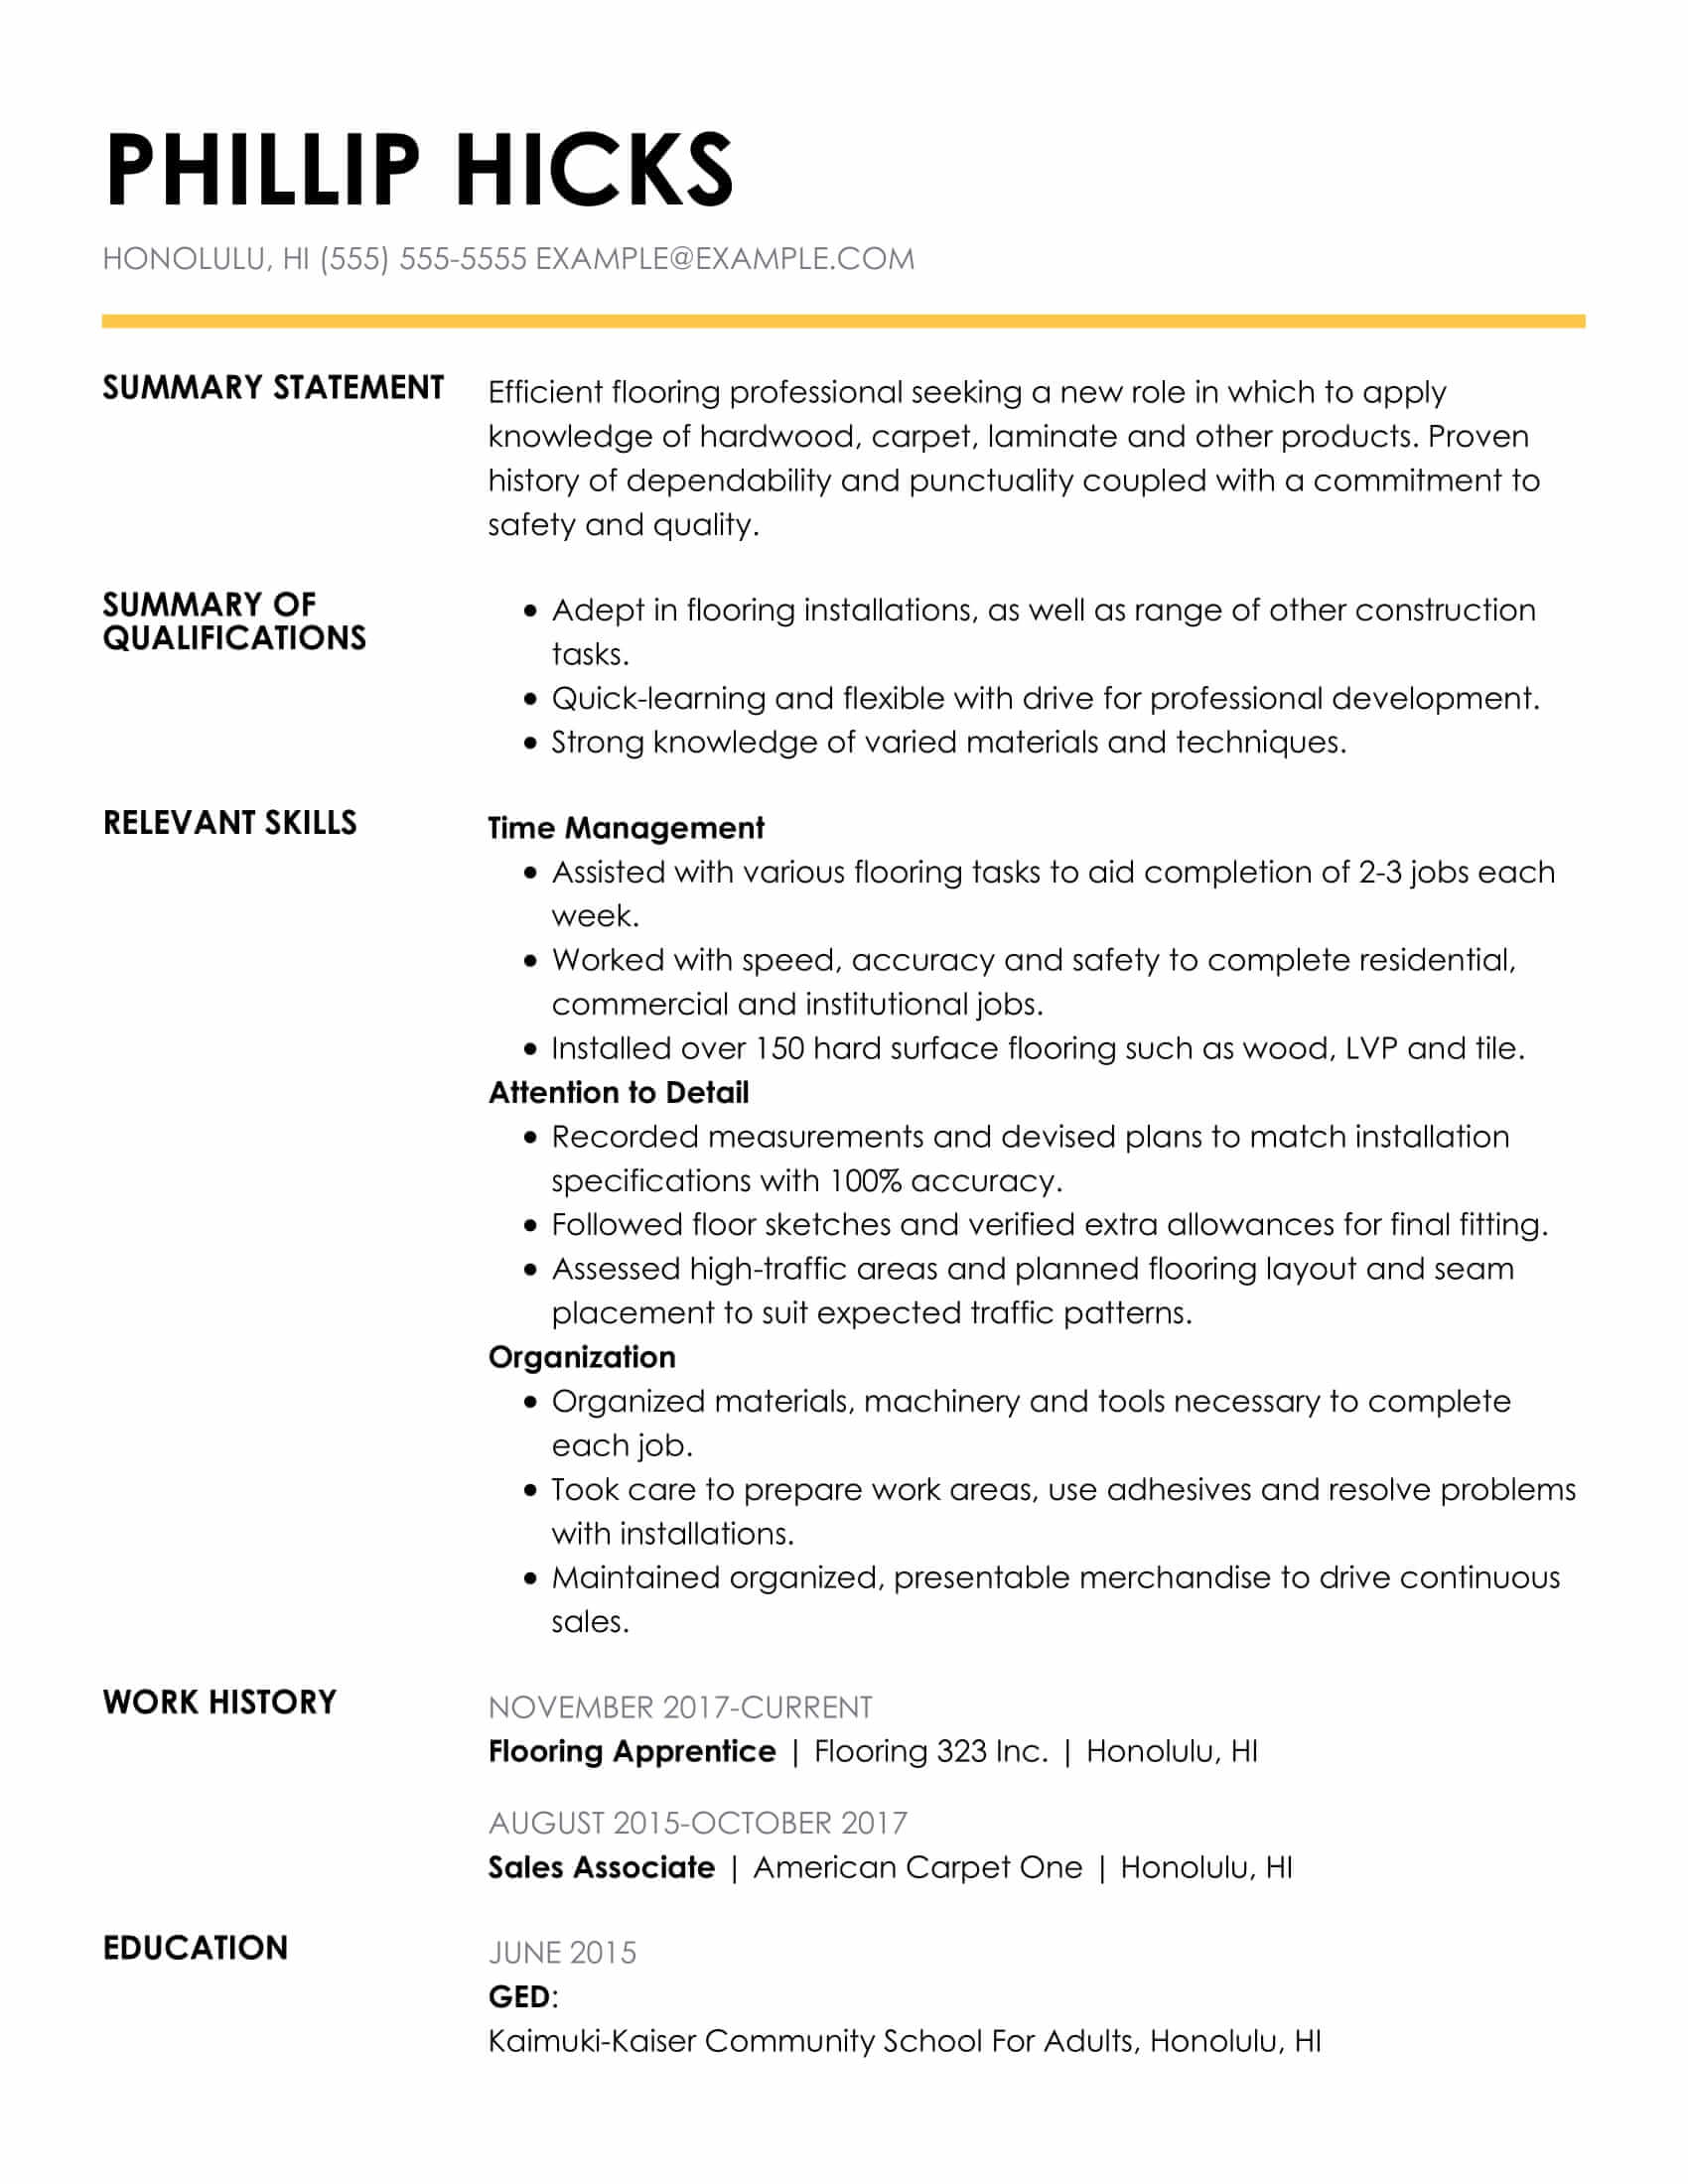 Download Good Qualifications For A Resume Images